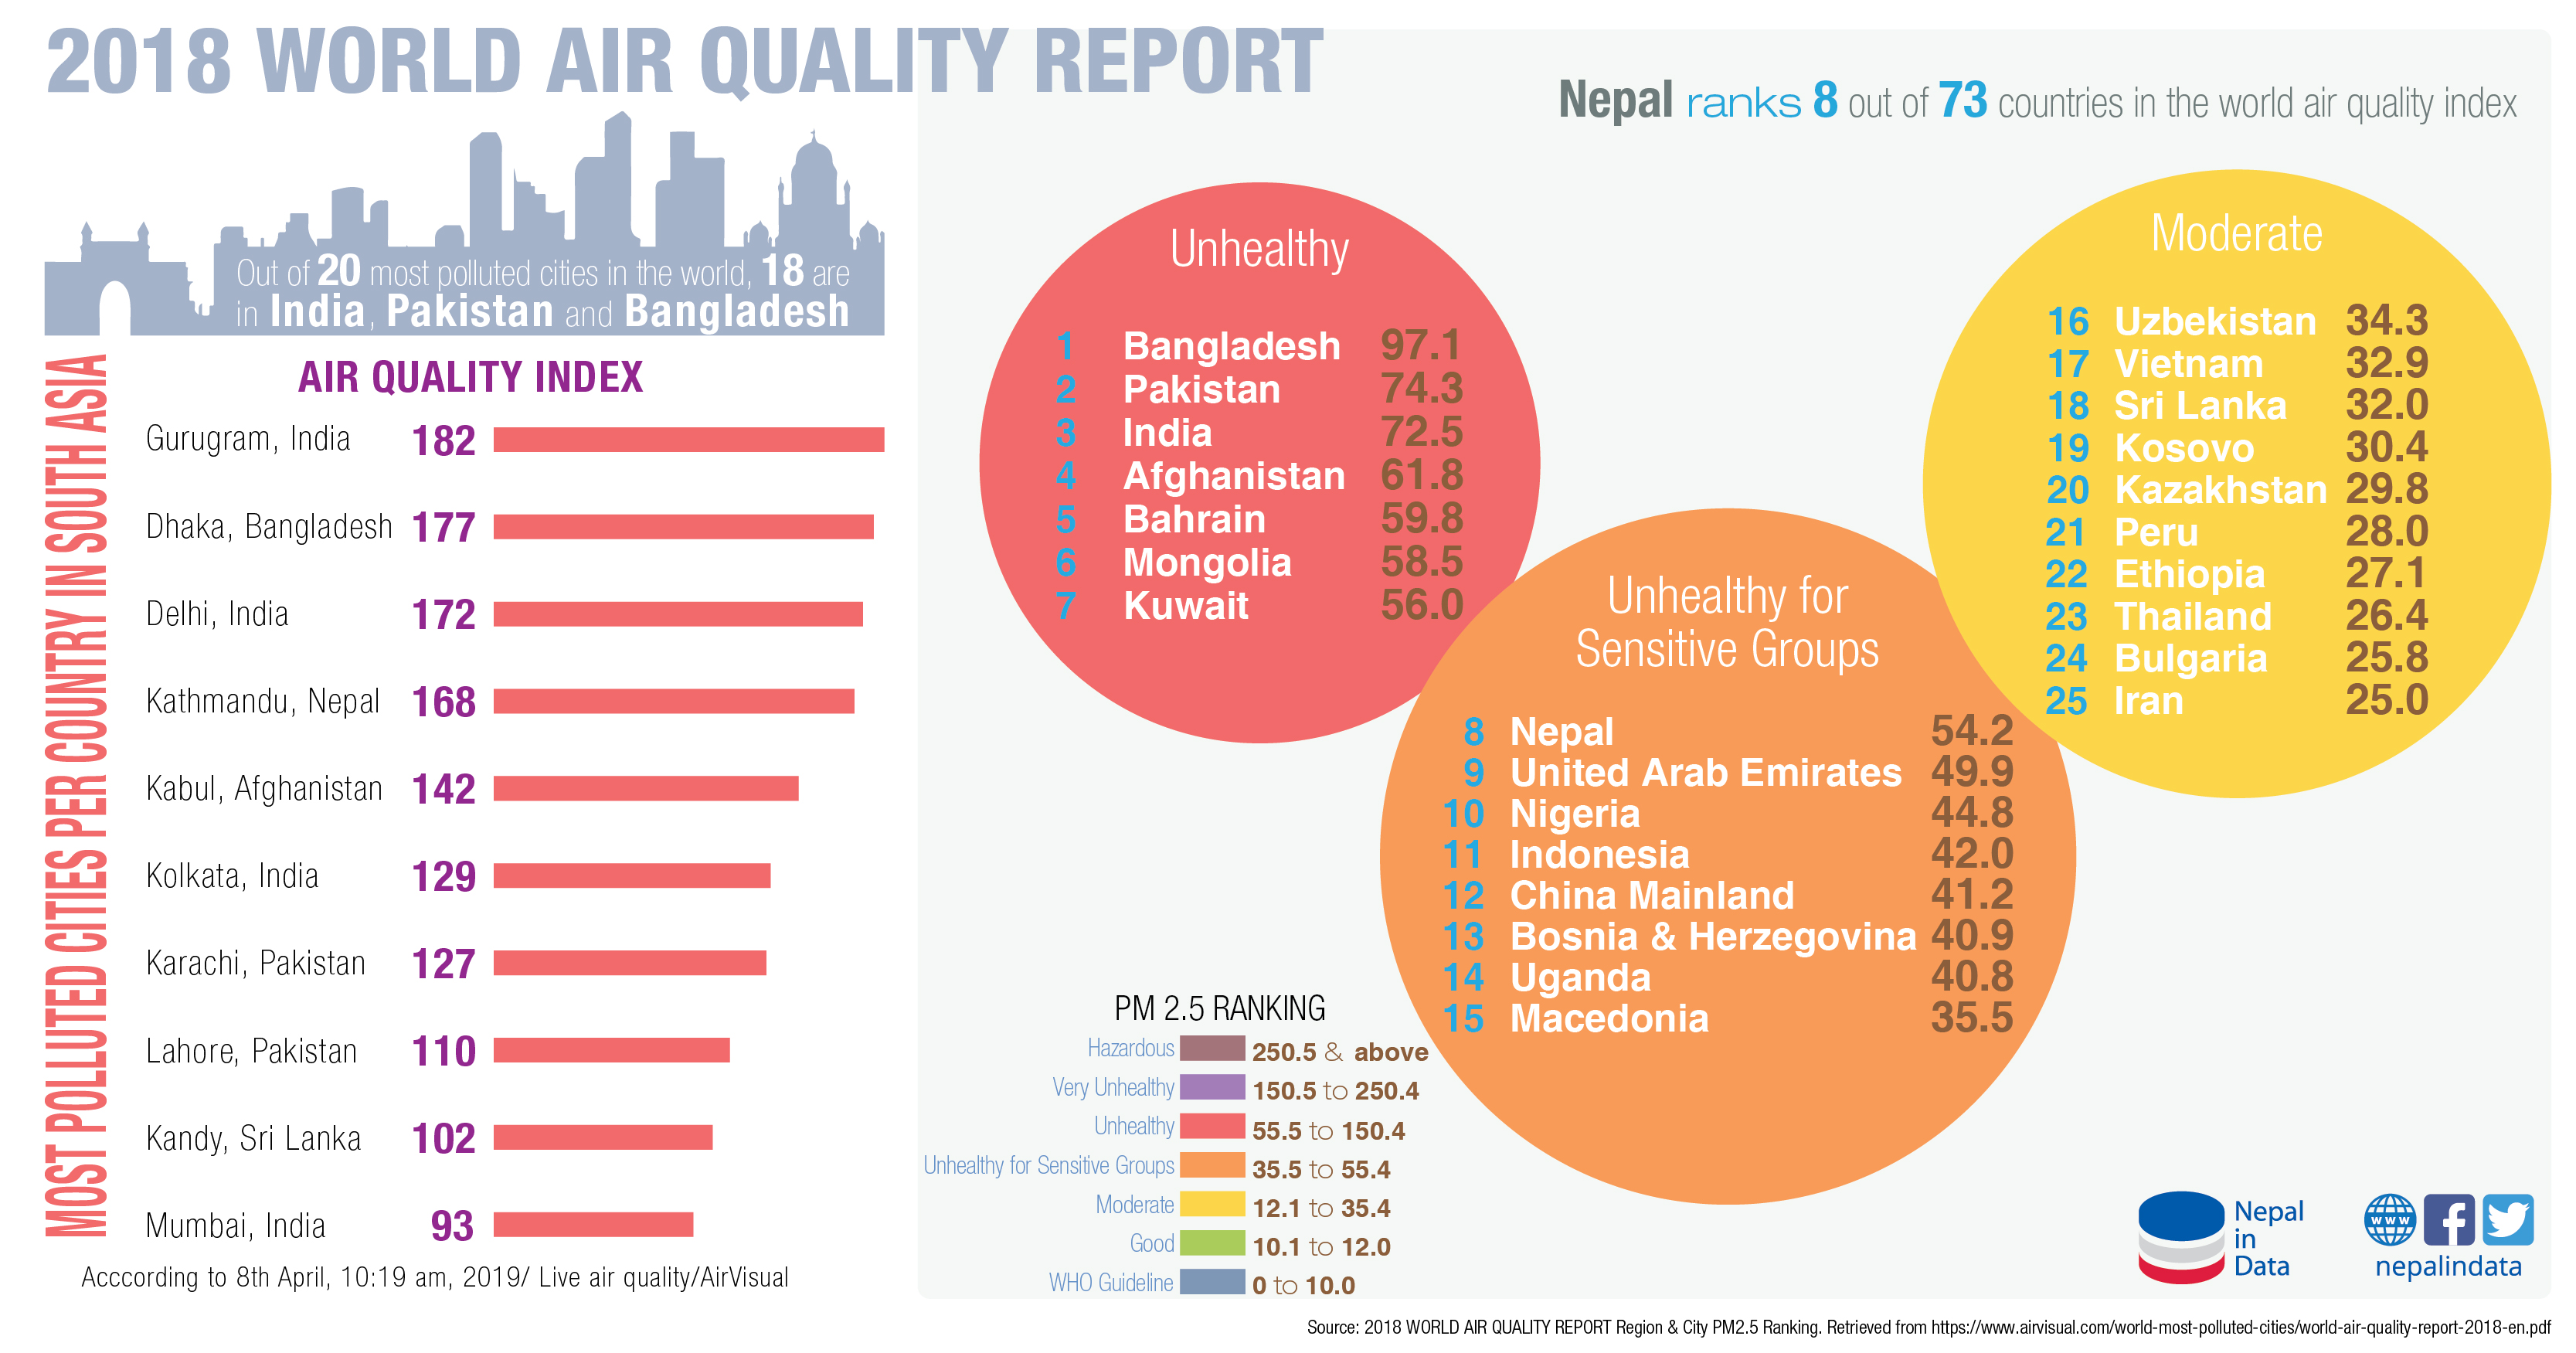 World Air Quality Report 2018